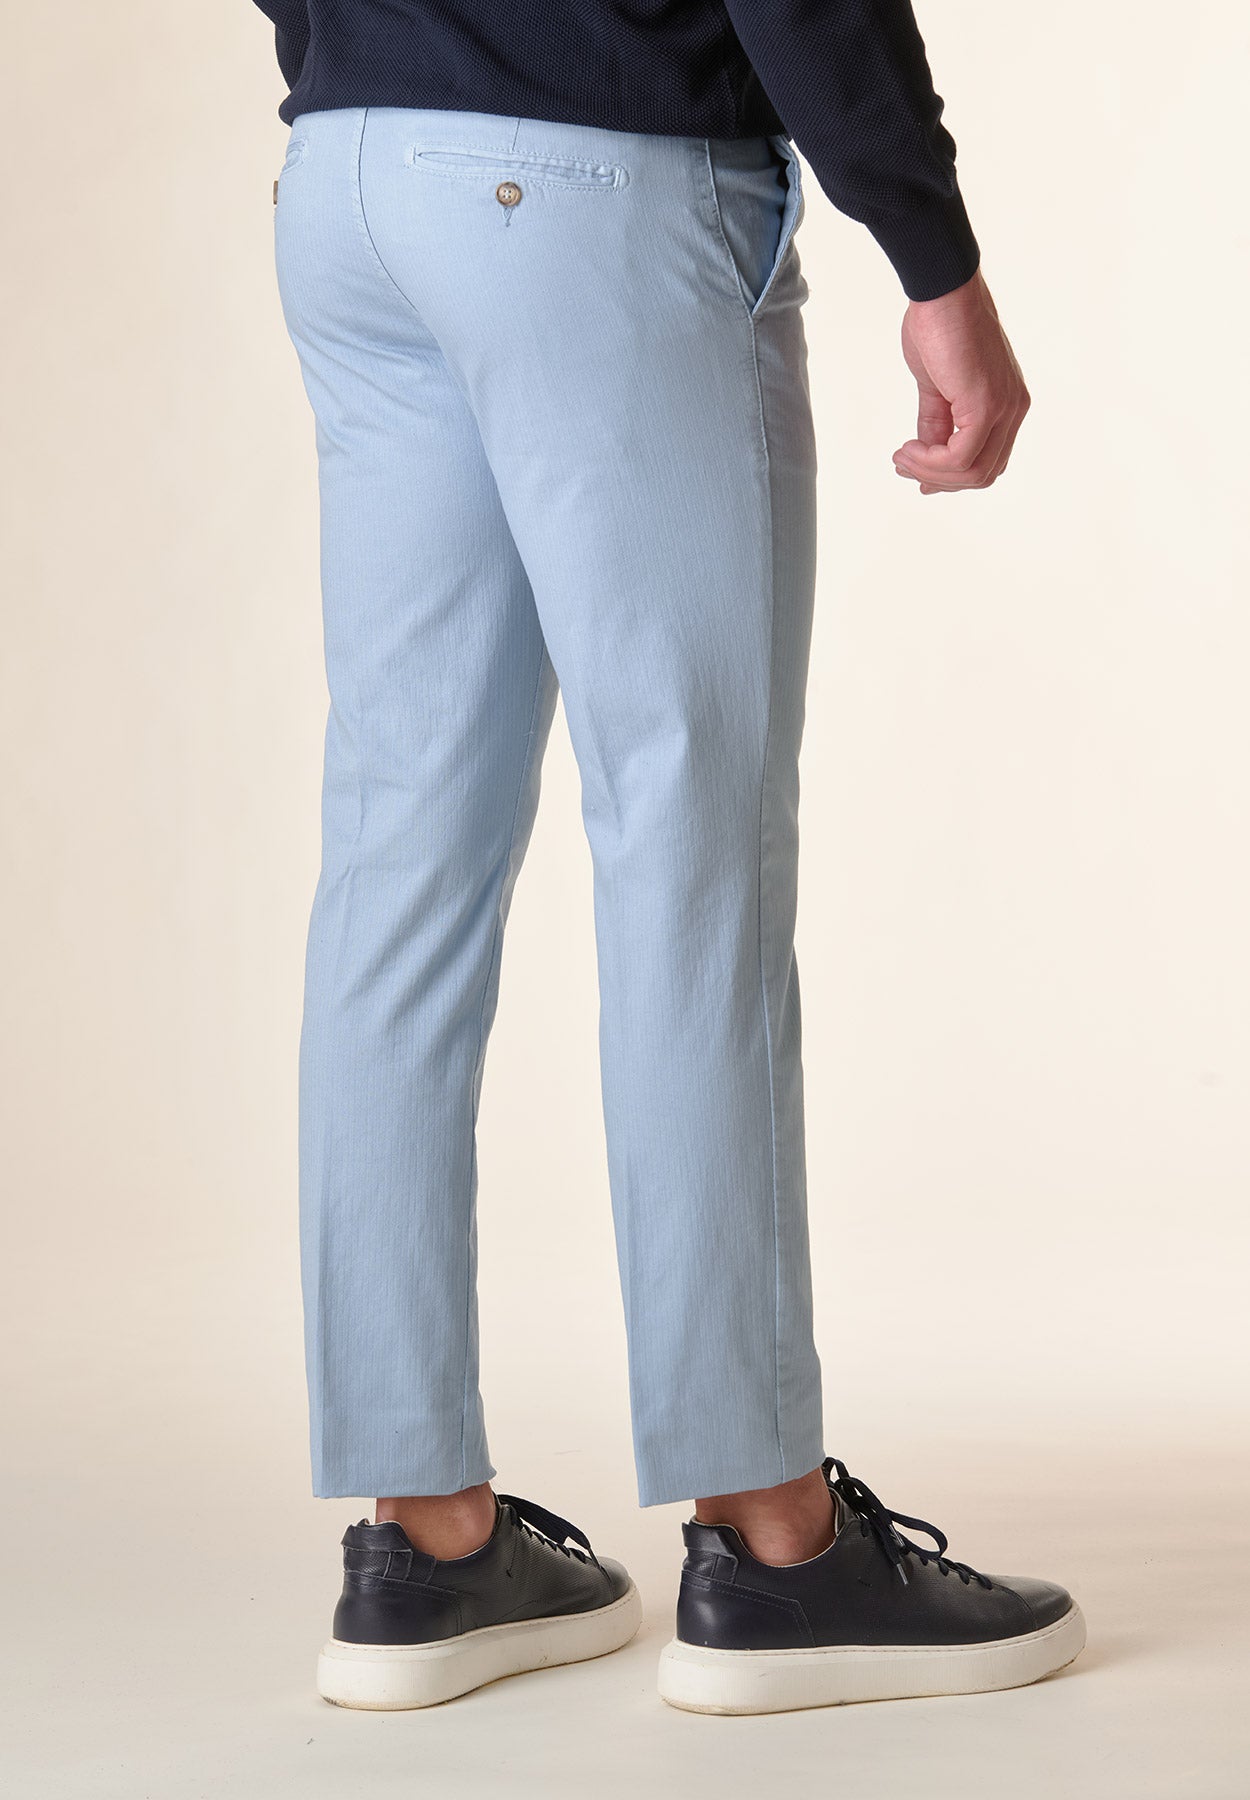 Light blue micro-armoured stretch cotton regular fit trousers